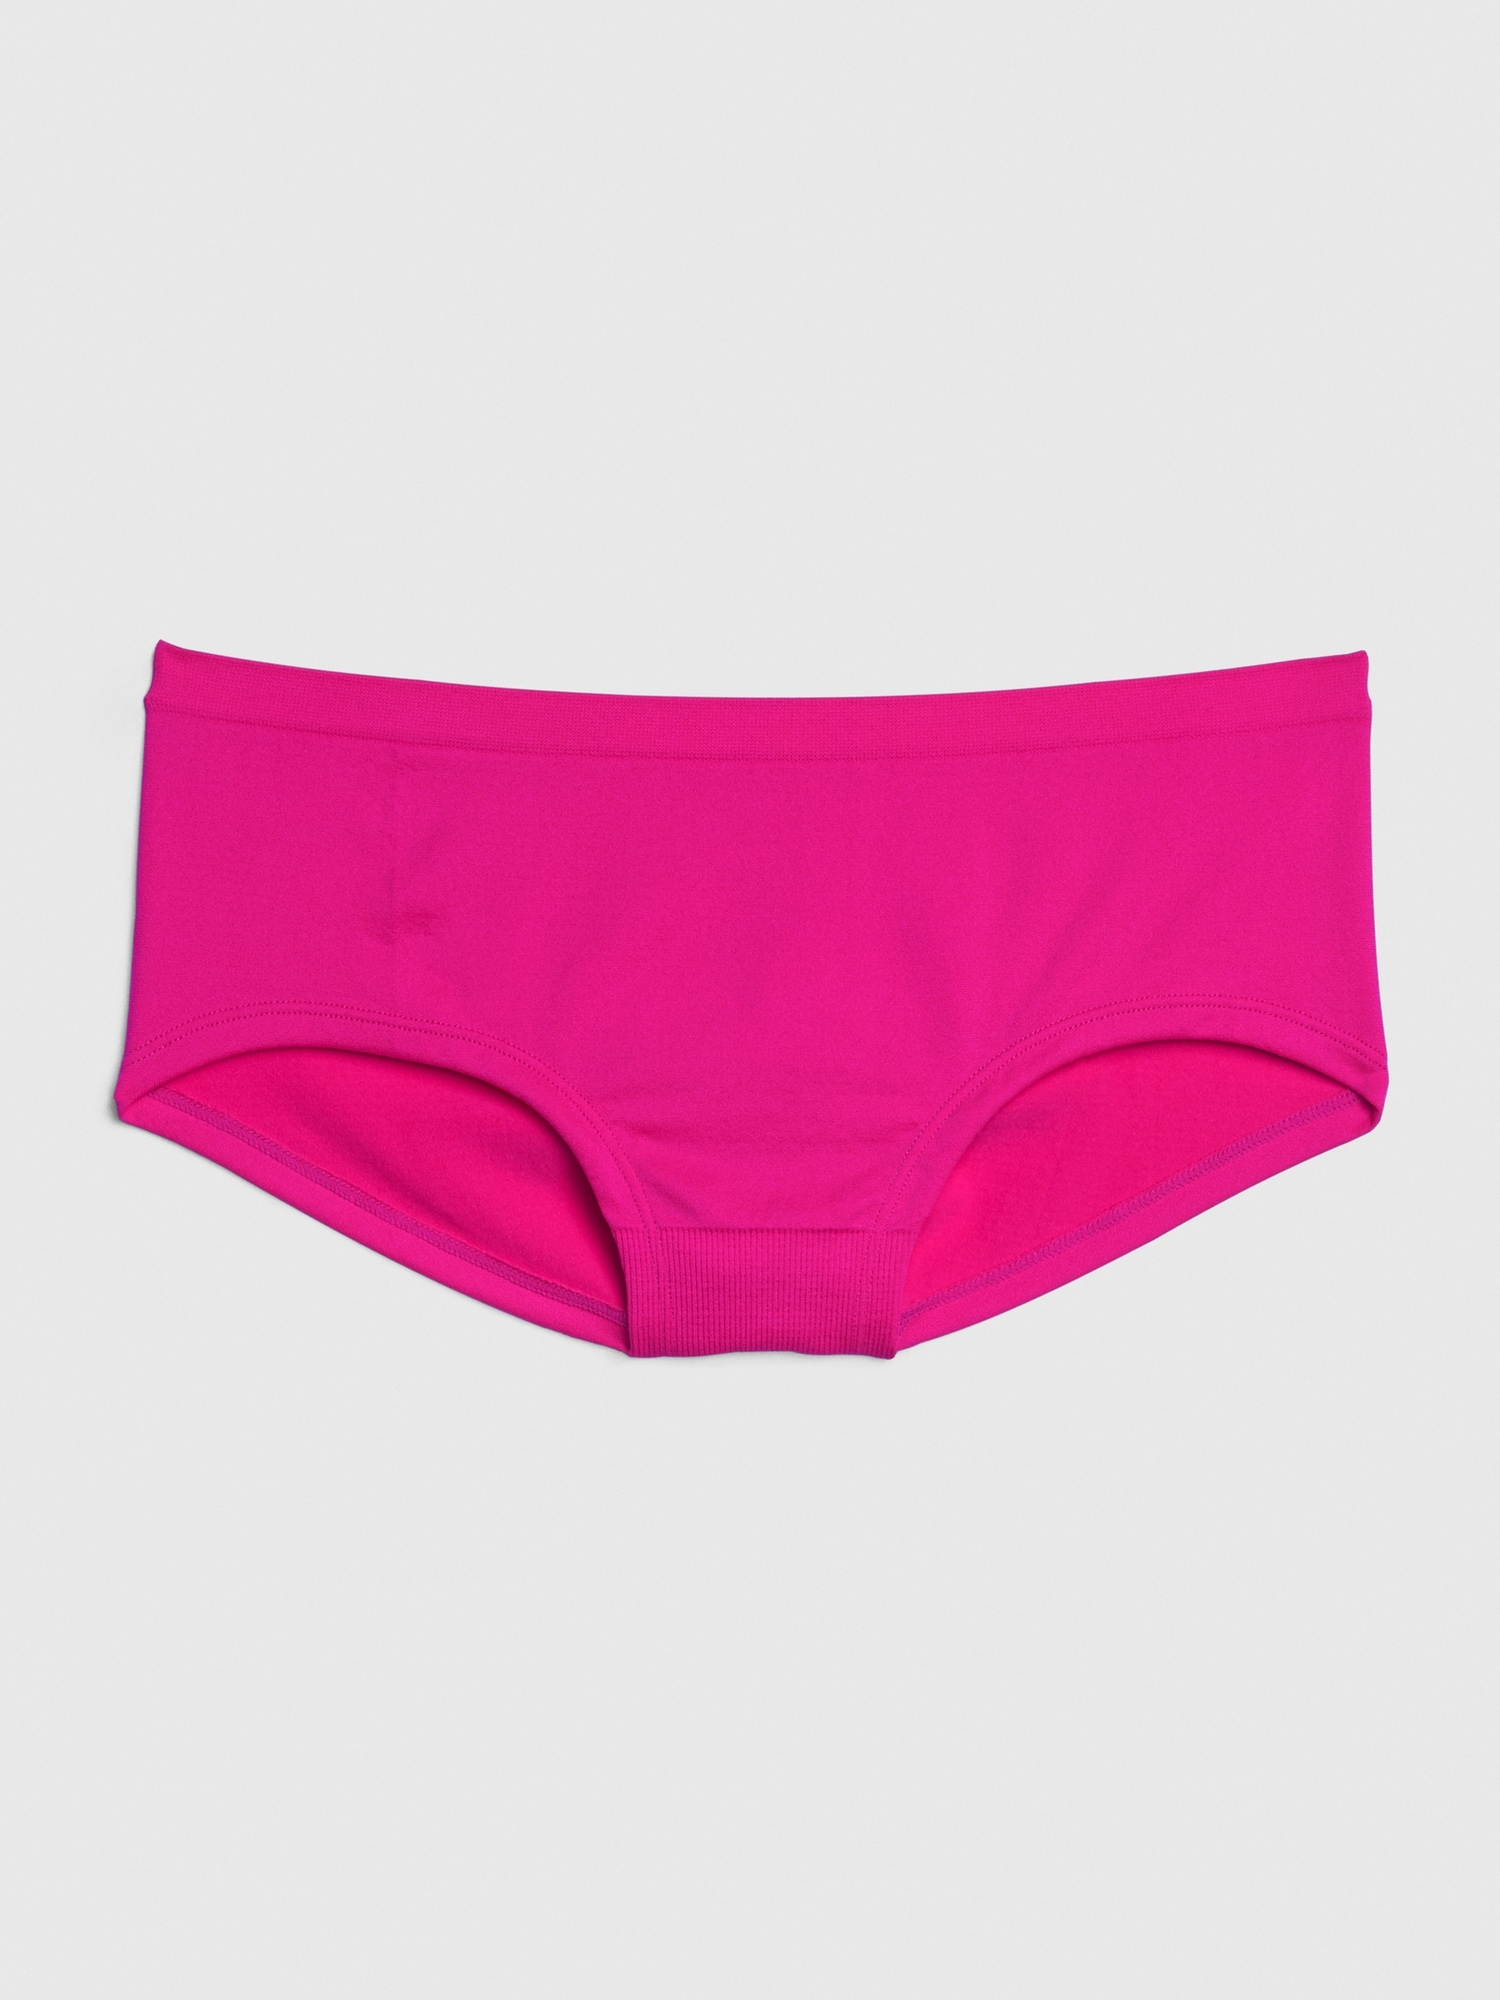 Gap on X: Introducing Love by GapBody — luxurious comfort and